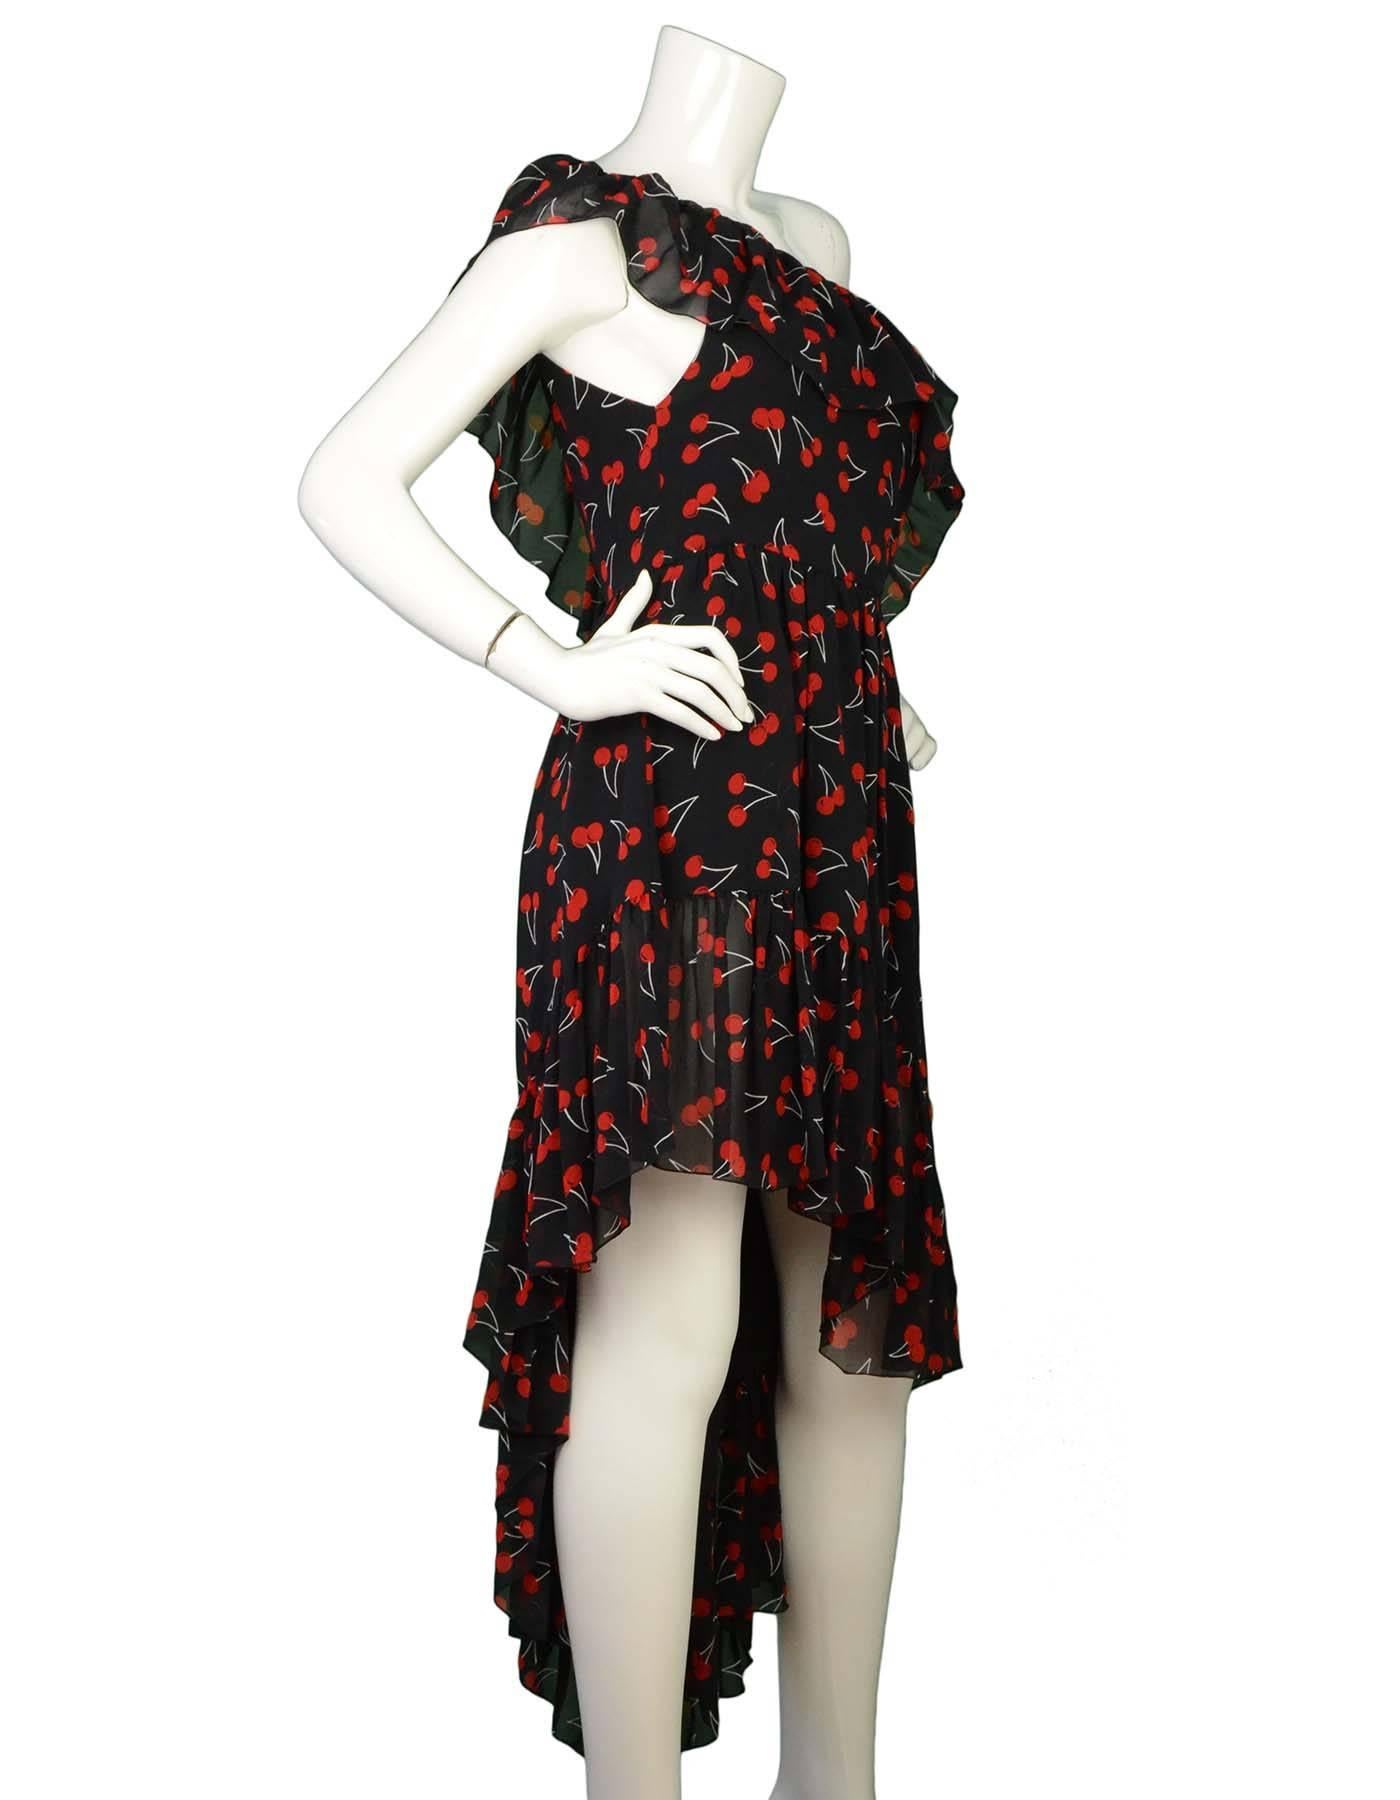 Saint Laurent Black and Red Silk Cherry Print Dress Sz 40
Features ruffle trim and high low hem and one shoulder design

Made In: France
Color: Black and red
Composition: 100% Silk
Lining: Black silk
Closure/Opening: Hidden side zip